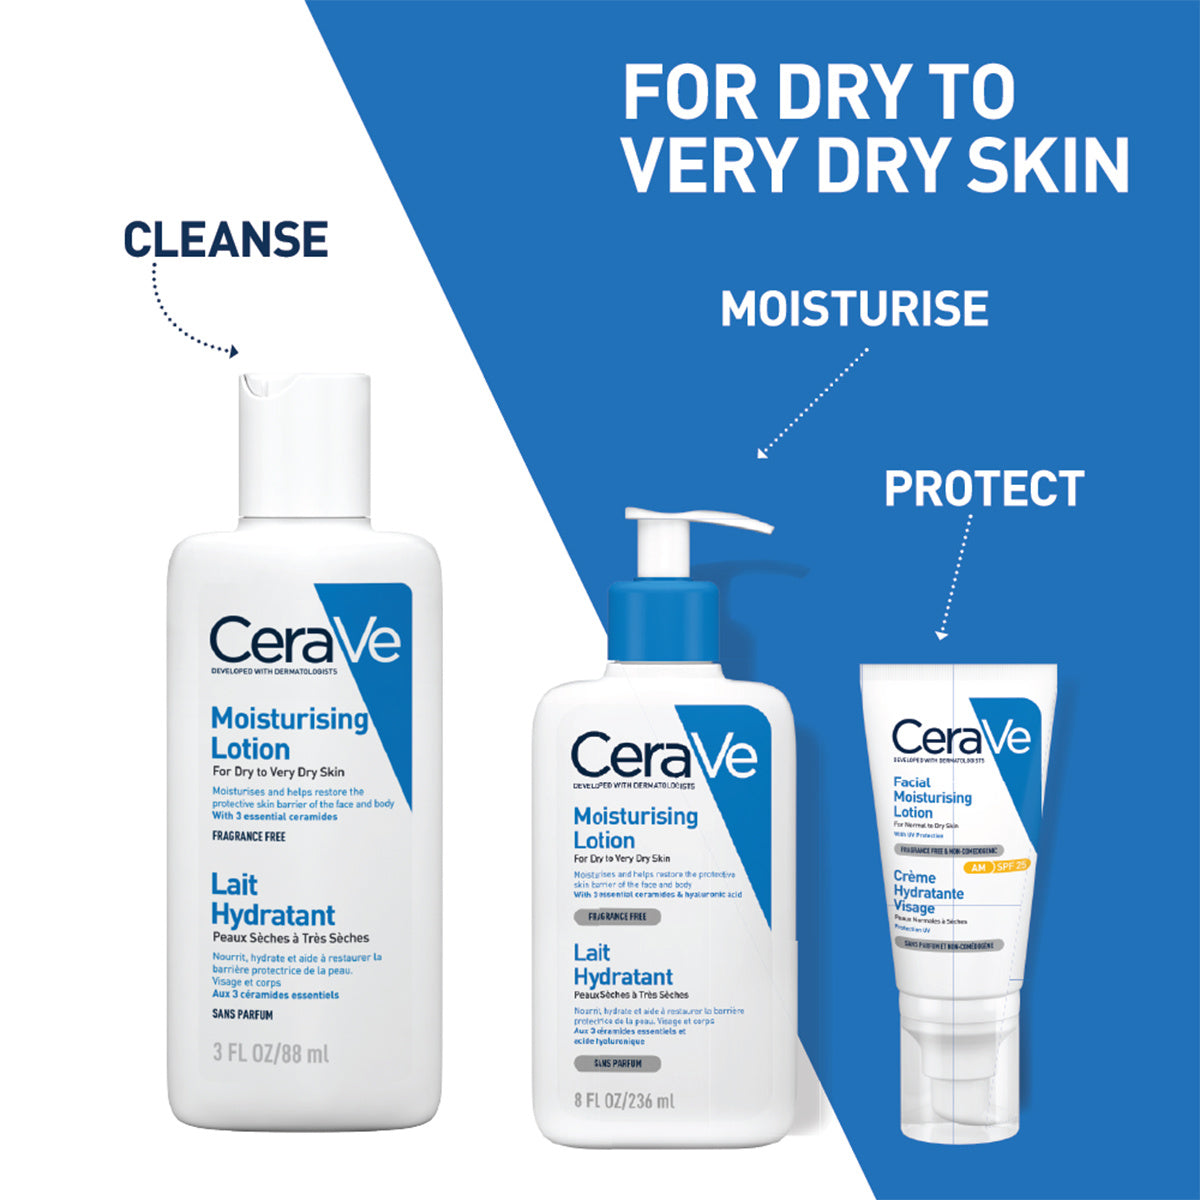 CeraVe Moisturizing Lotion for Dry to Very Dry Skin (88ml) CeraVe